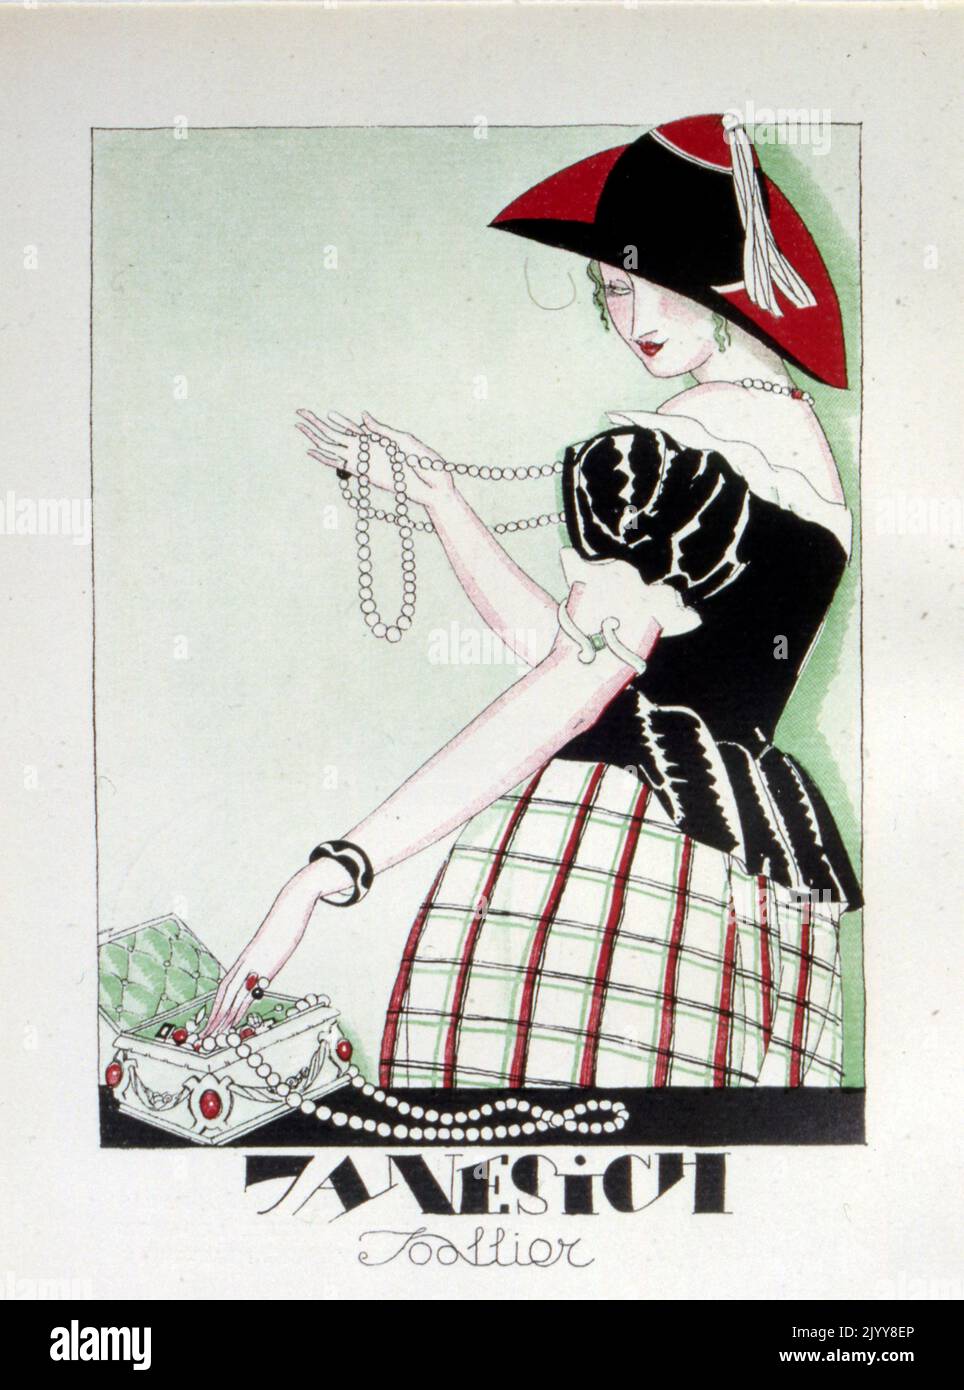 A coloured picture of a lady with pearls advertised by the company Janesich, fodllier. Stock Photo